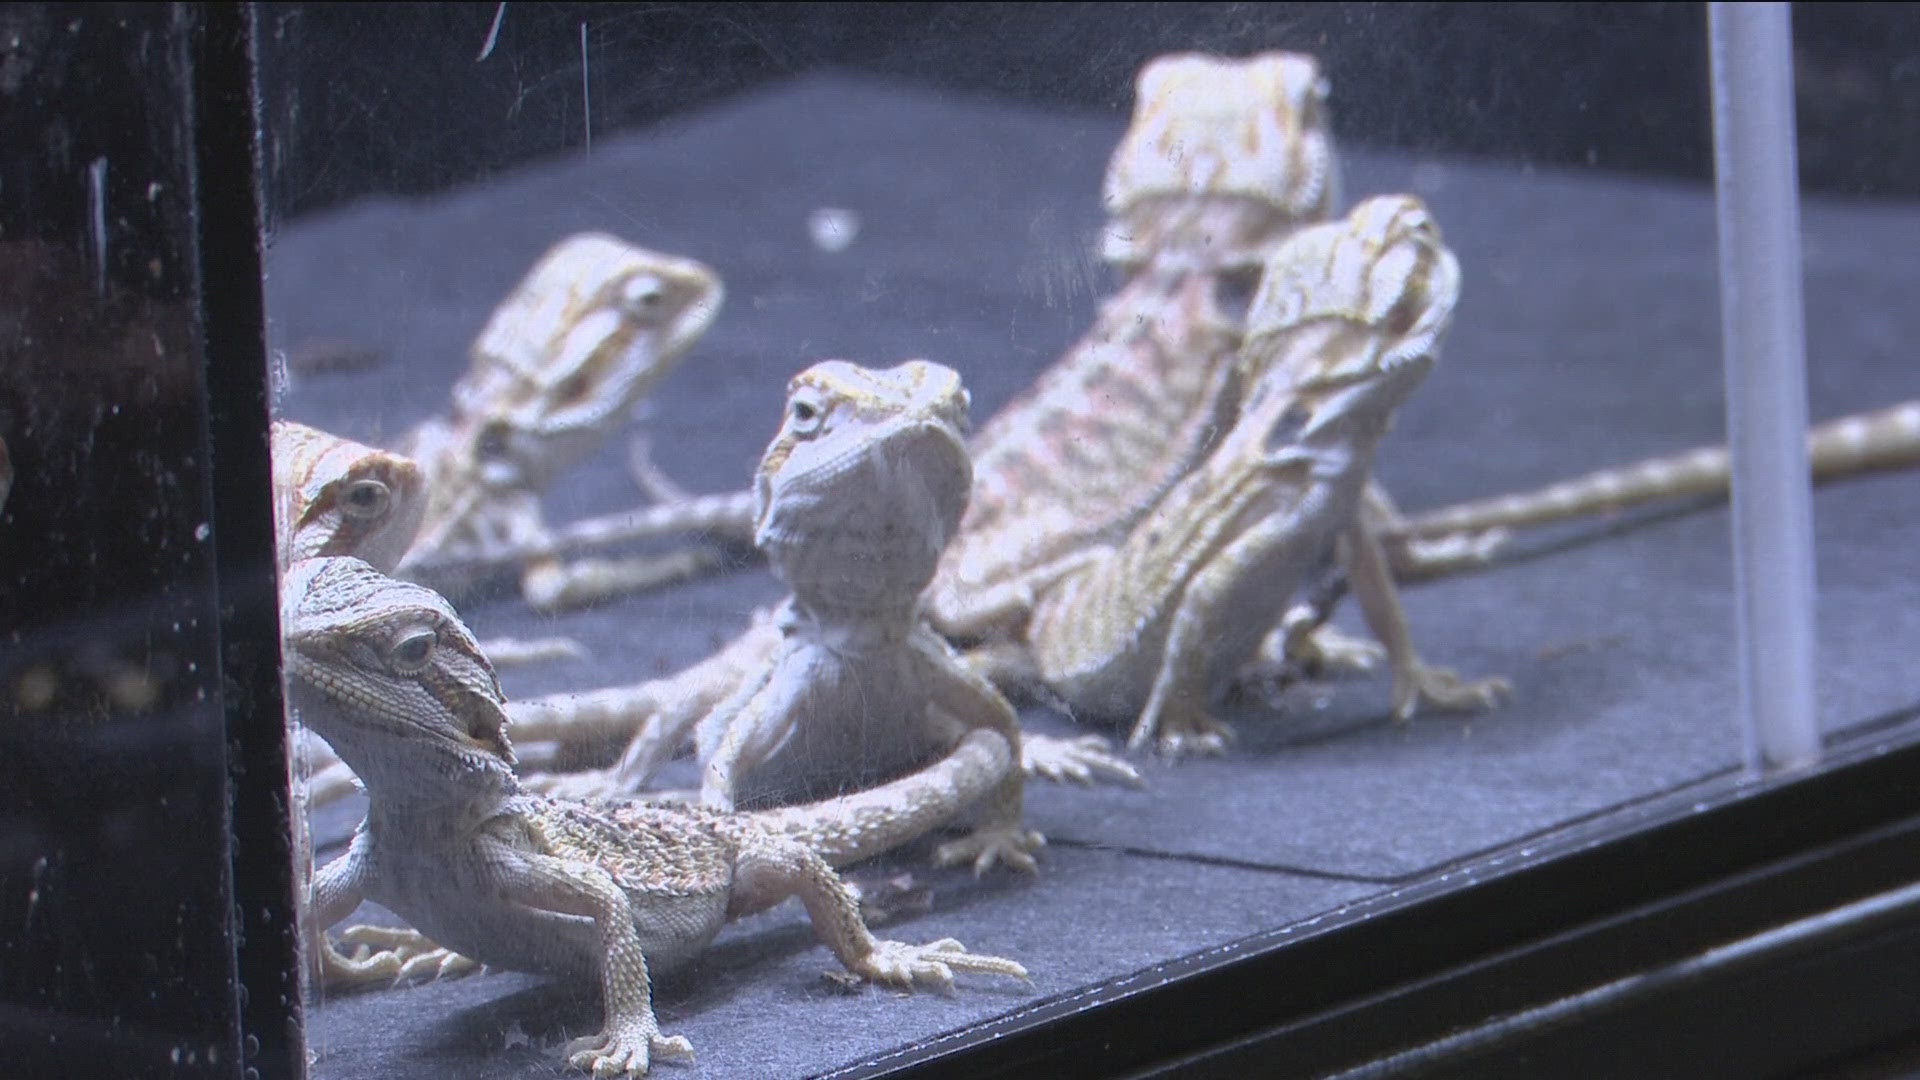 From geckos and tarantulas to African Pigmy Door Mice, there is something for every fan of unusual pets at the monthly Toledo Reptile Show.